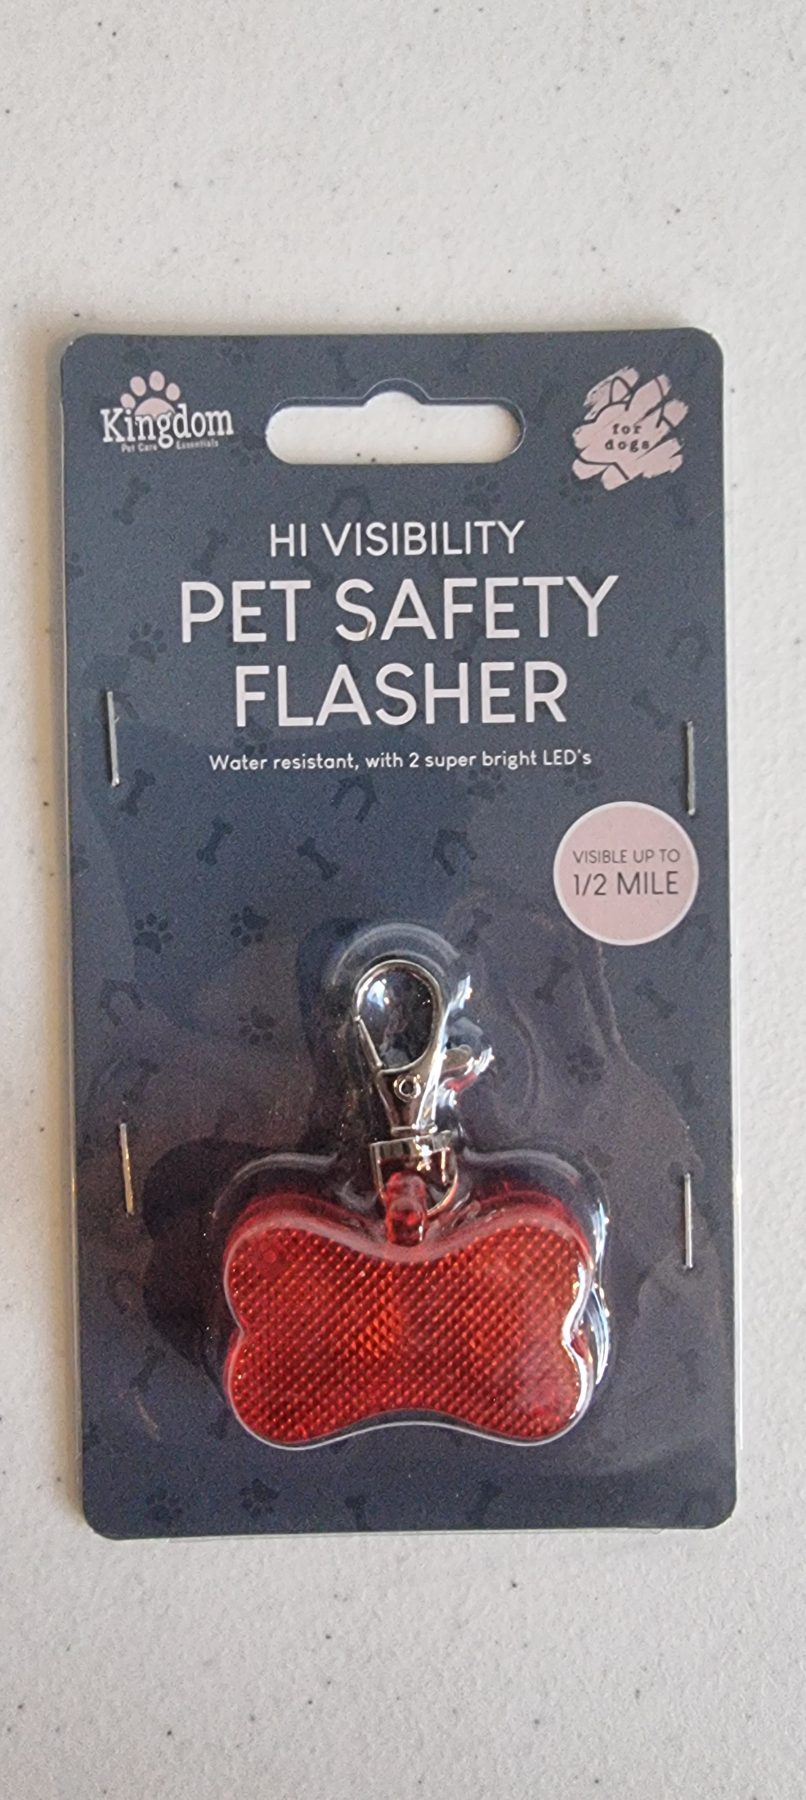 Pet safety flasher